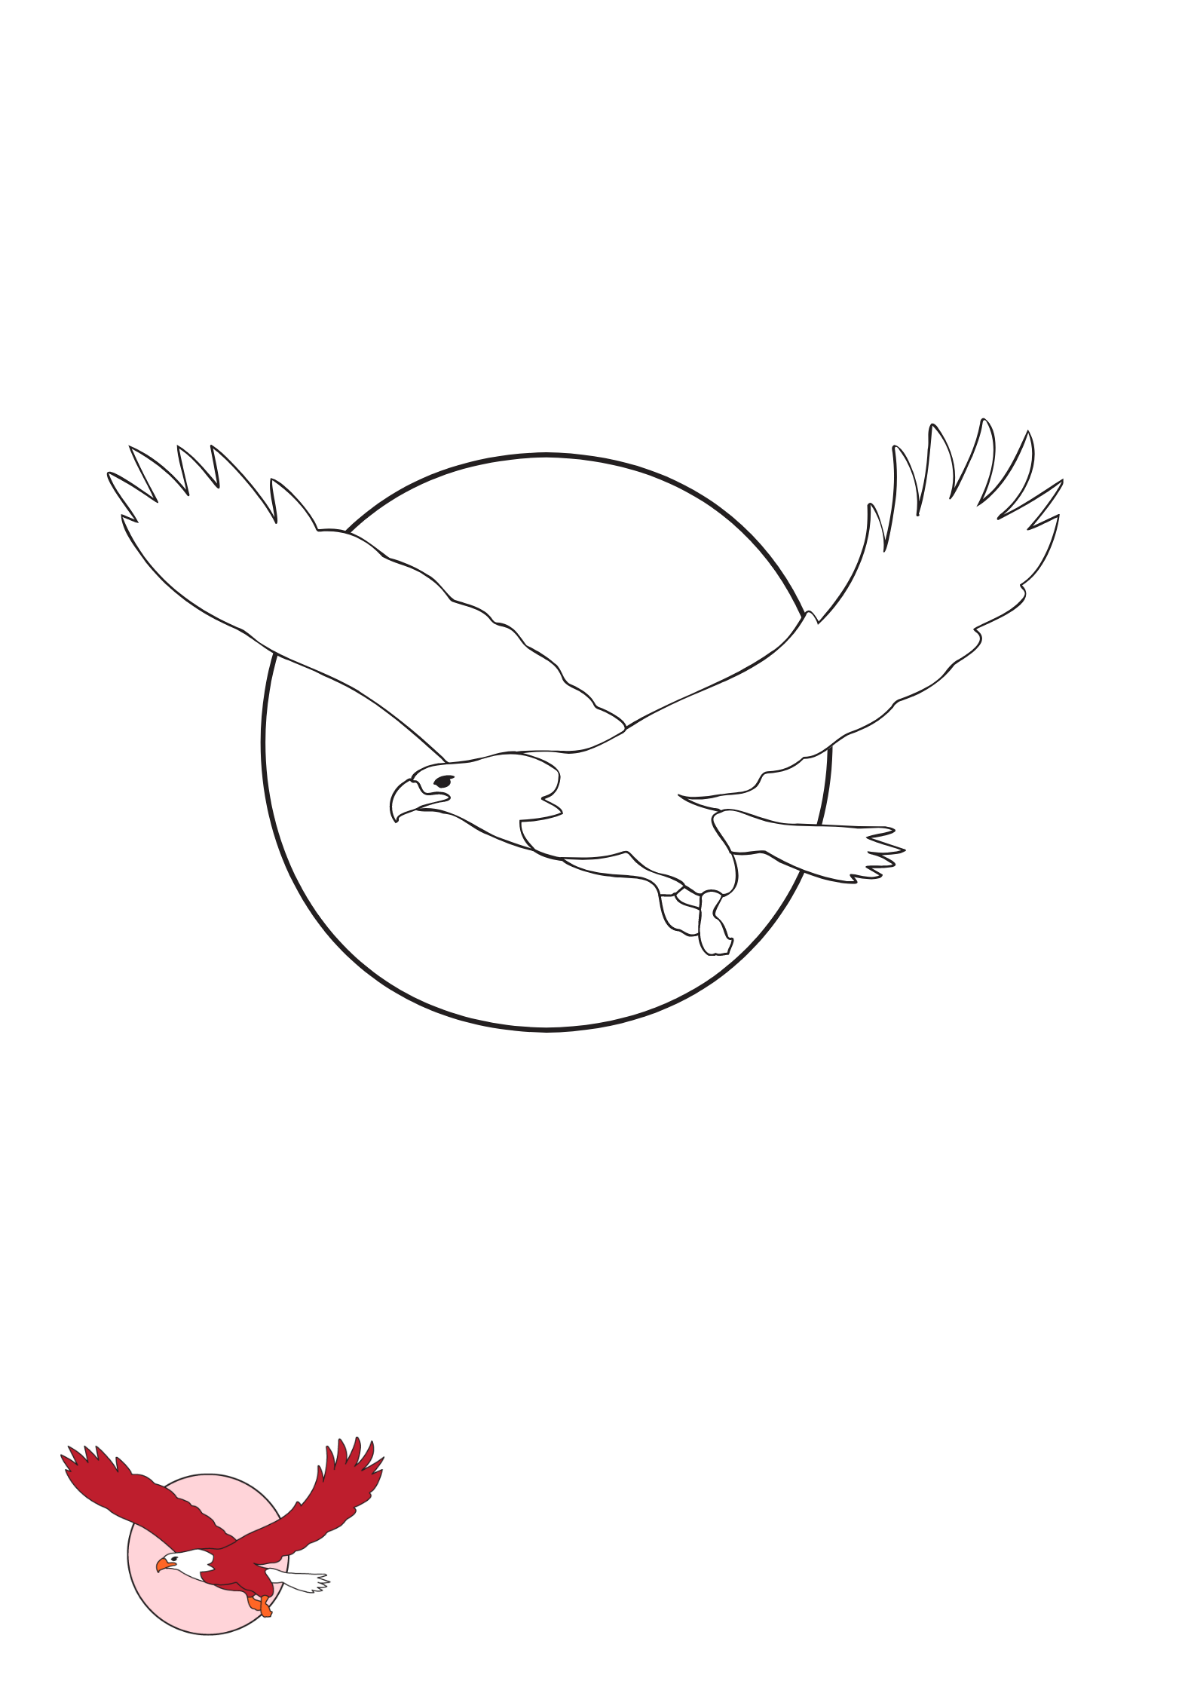 Red Eagle Coloring Page